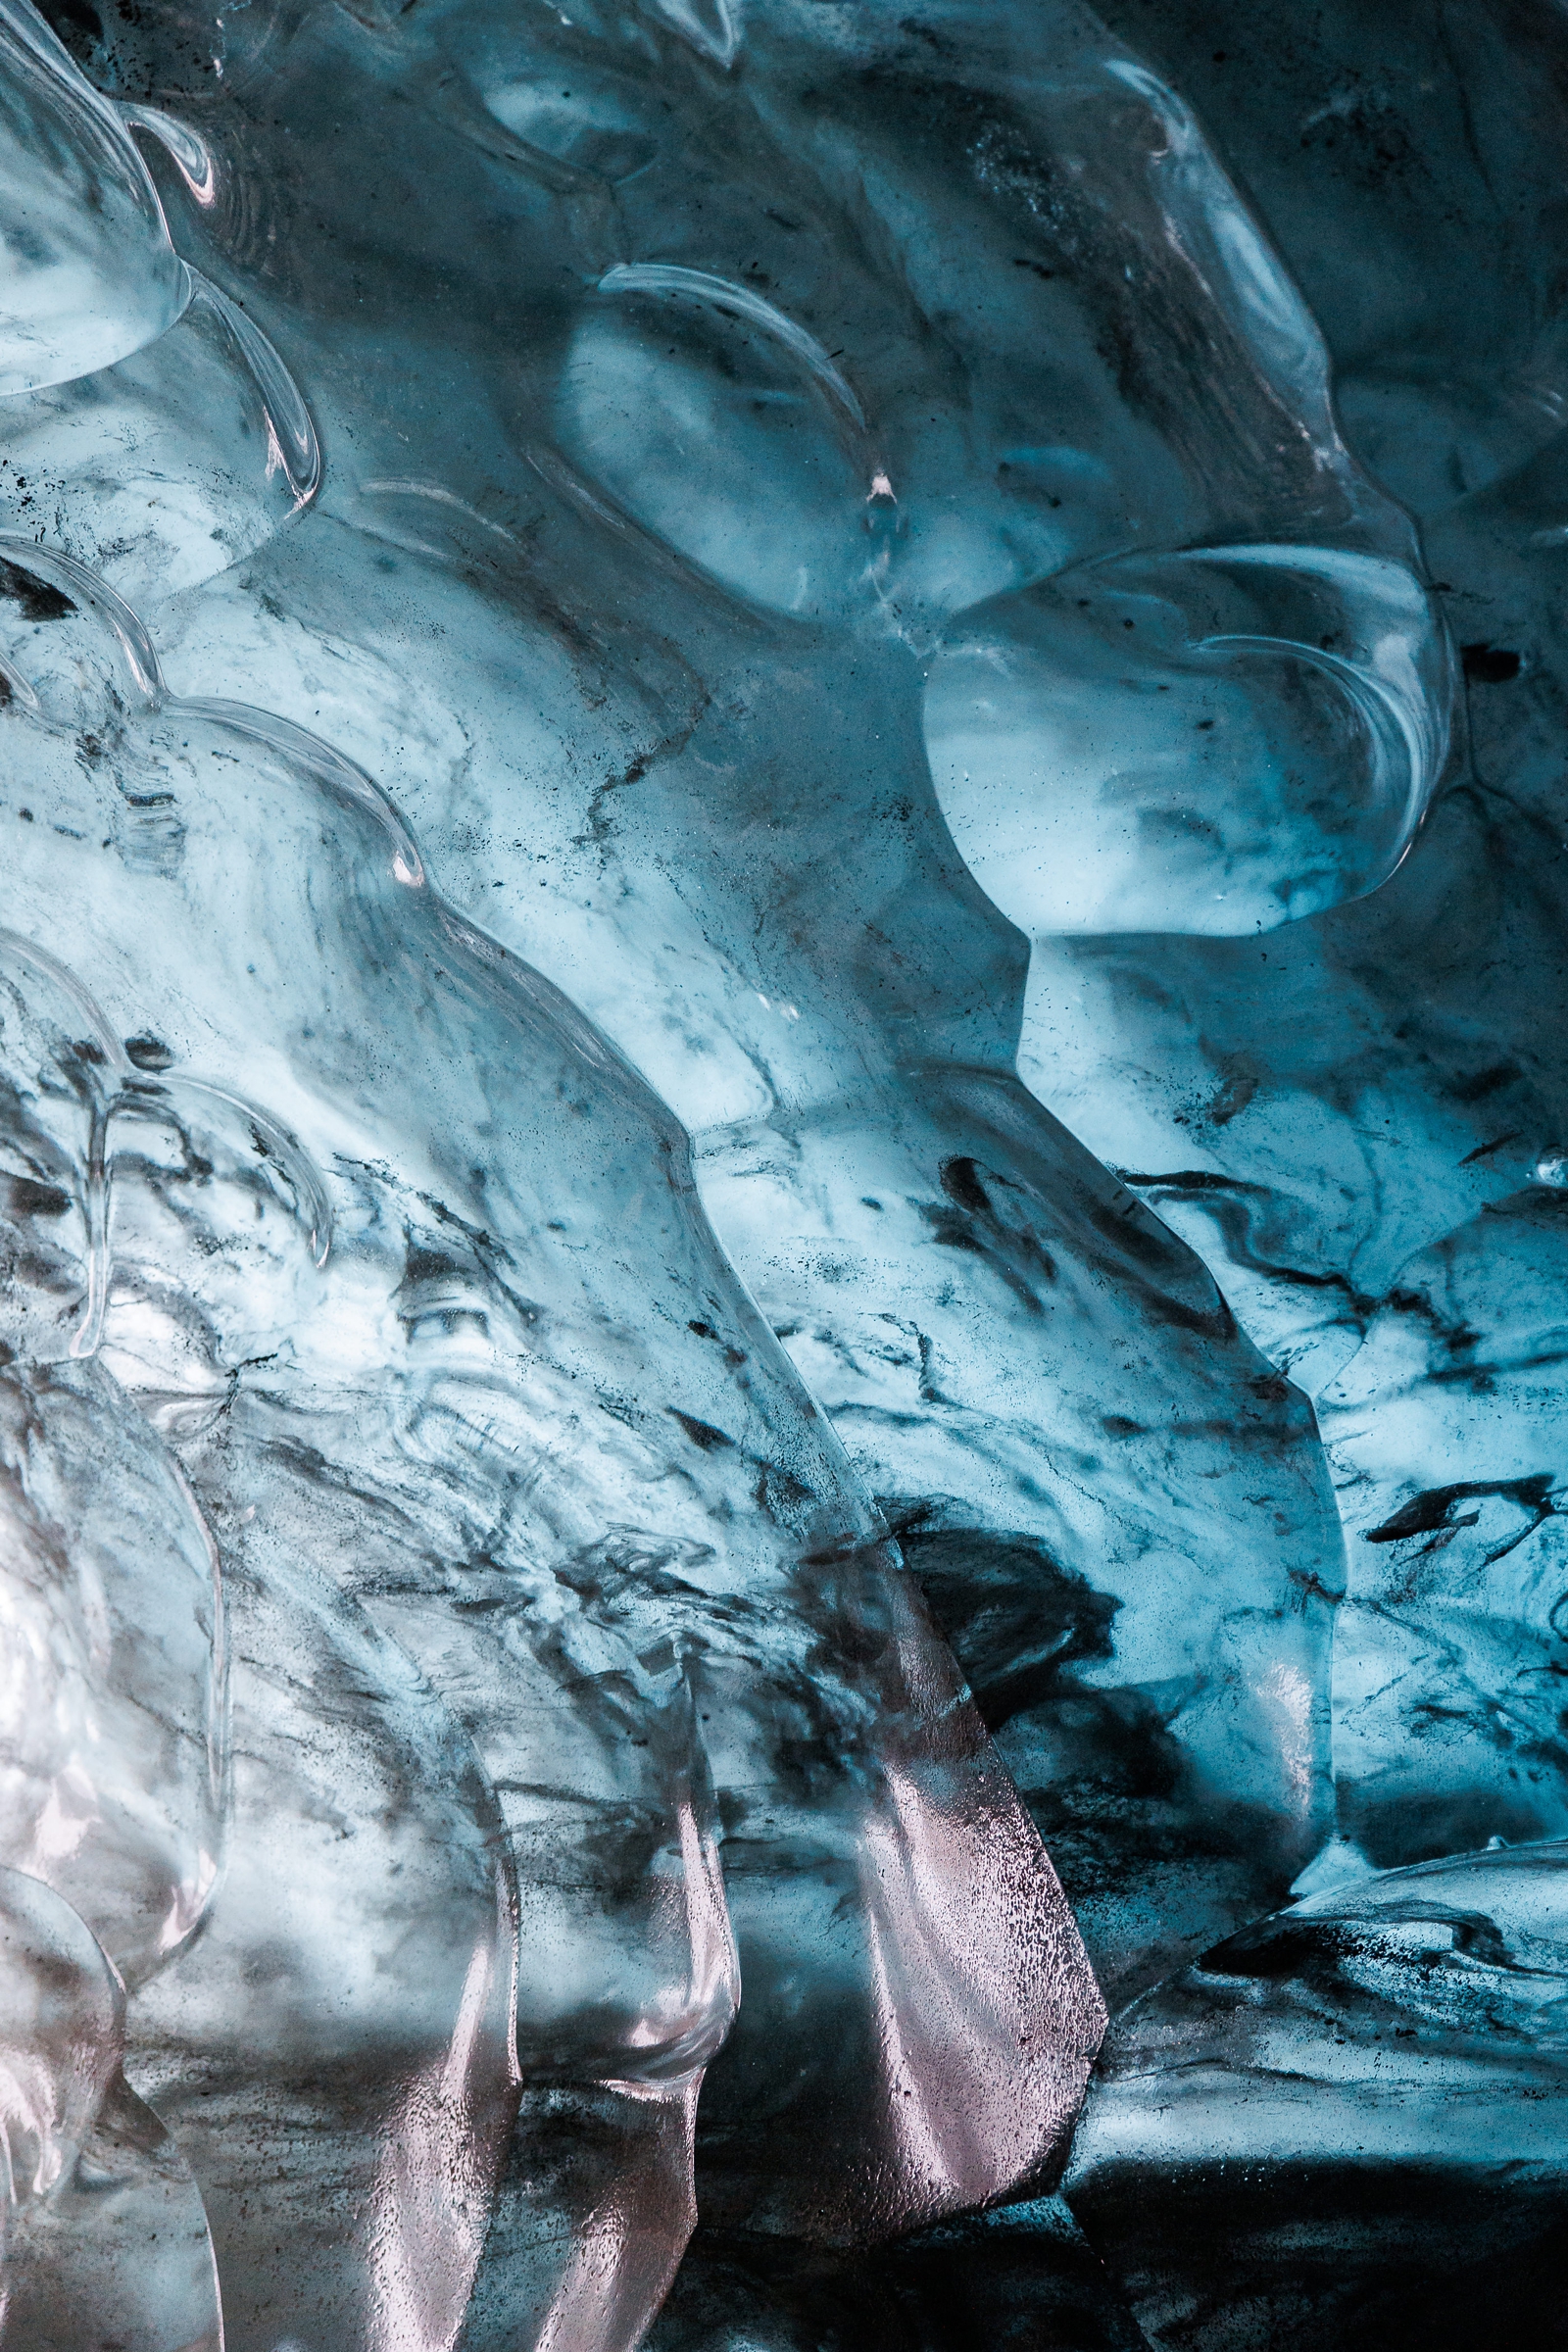 Would you like to elope in an Iceland glacier cave?